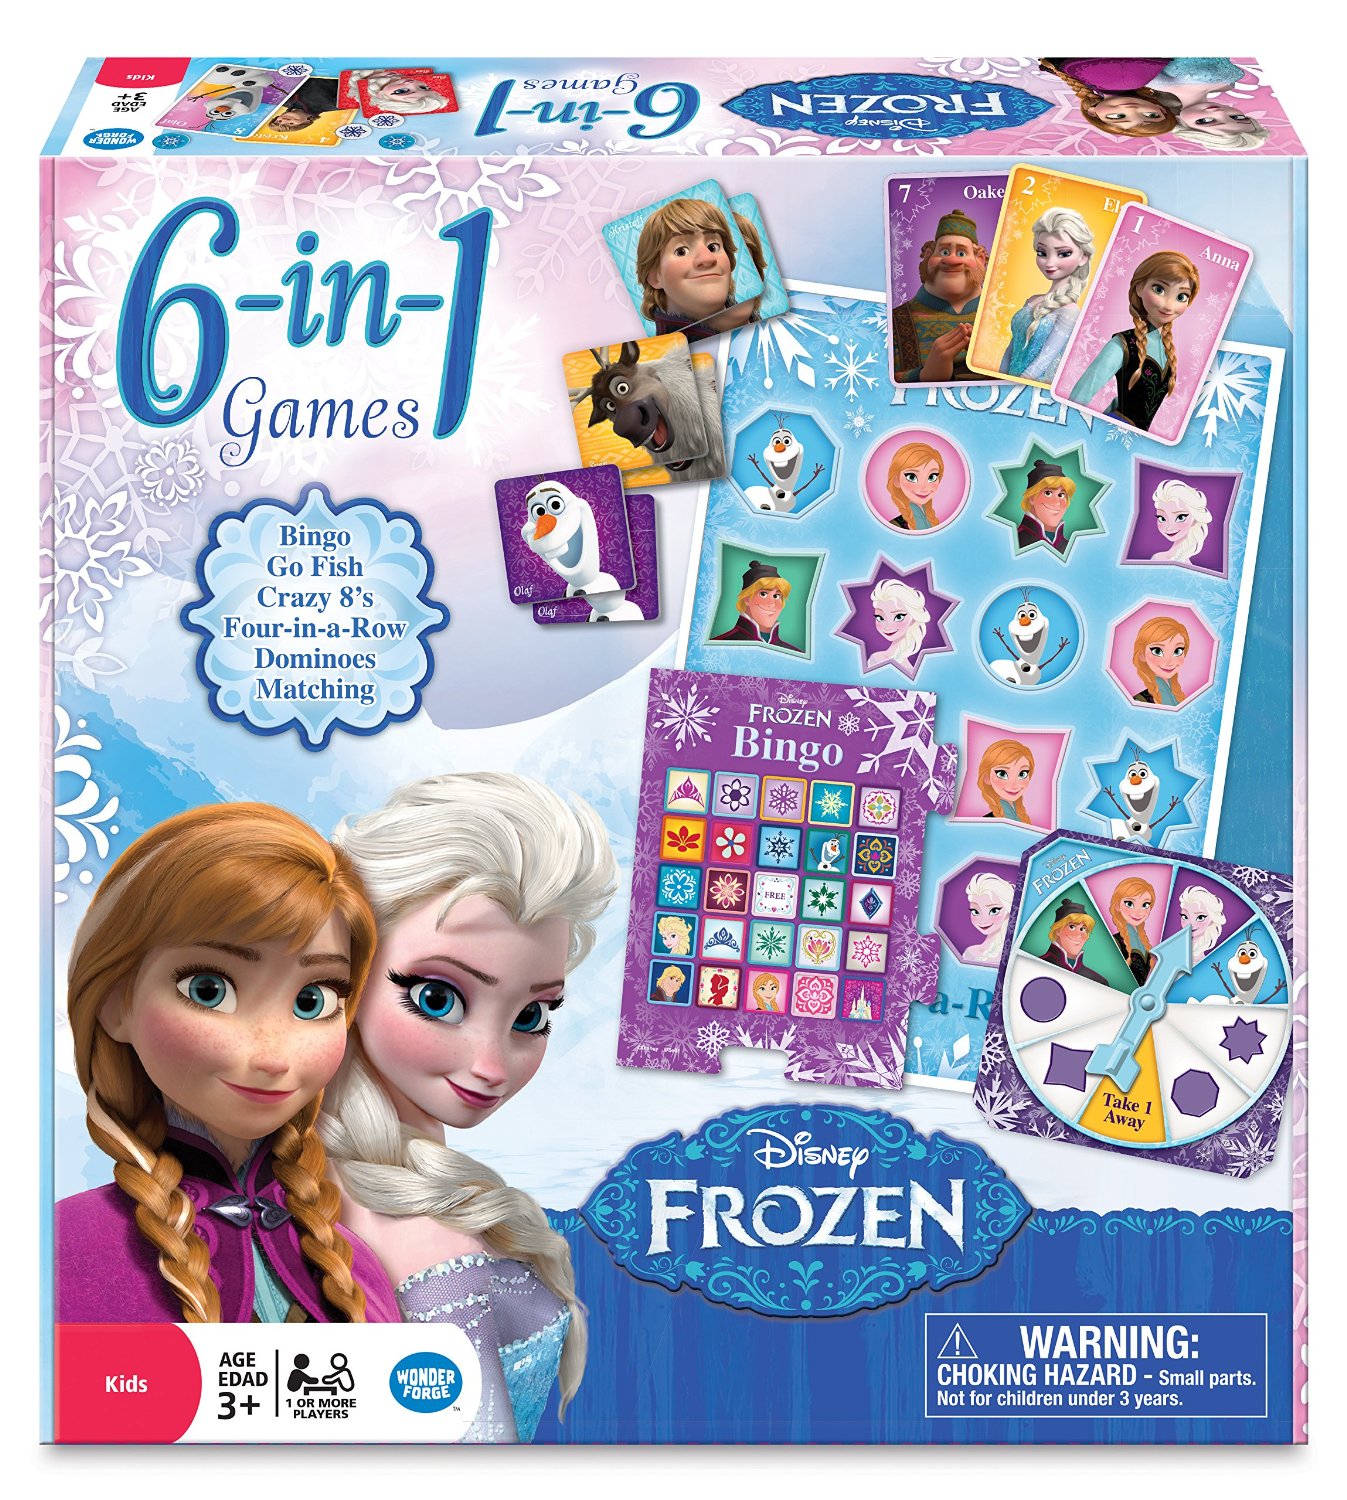 The Wonder Forge Frozen 6-in-1 Game Collection